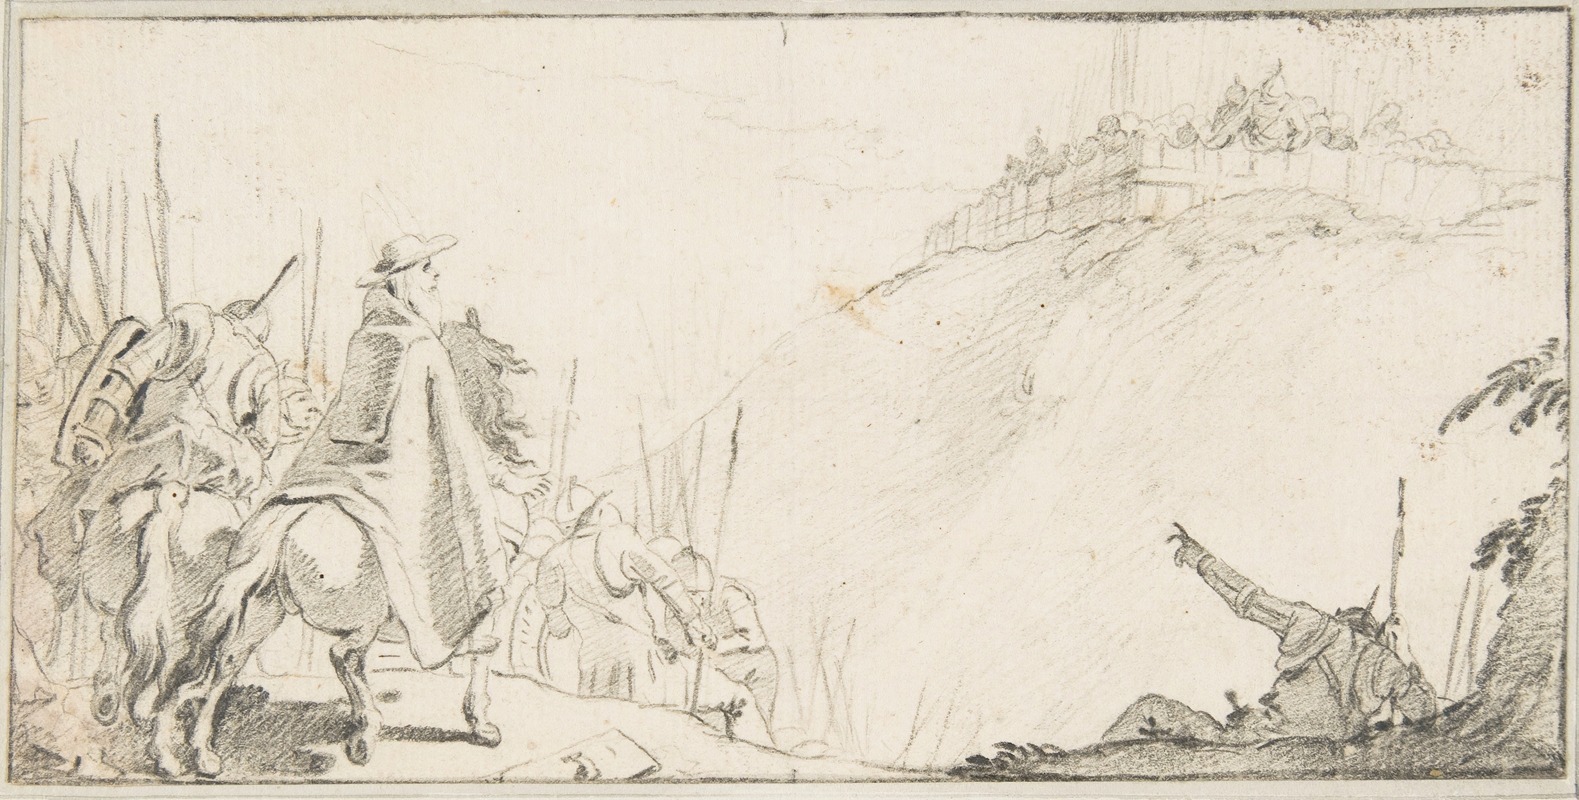 Giovanni Battista Tiepolo - Cardinal with Troops Facing a Fortification on a Hilltop